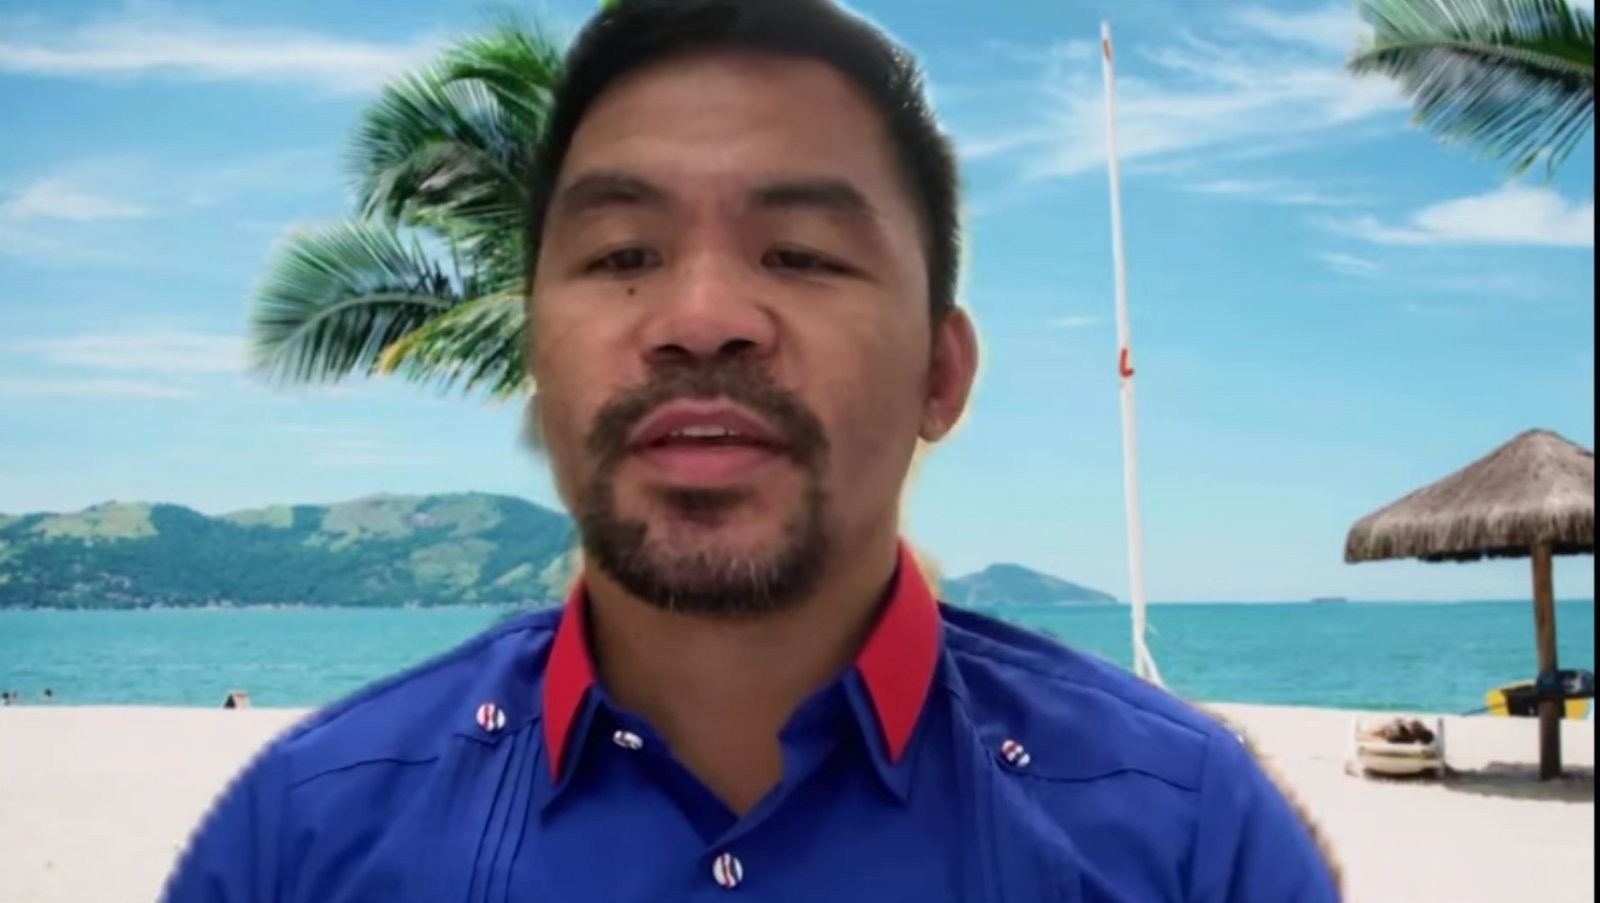 Inexperience? ‘I am a strict leader’, Pacquiao says